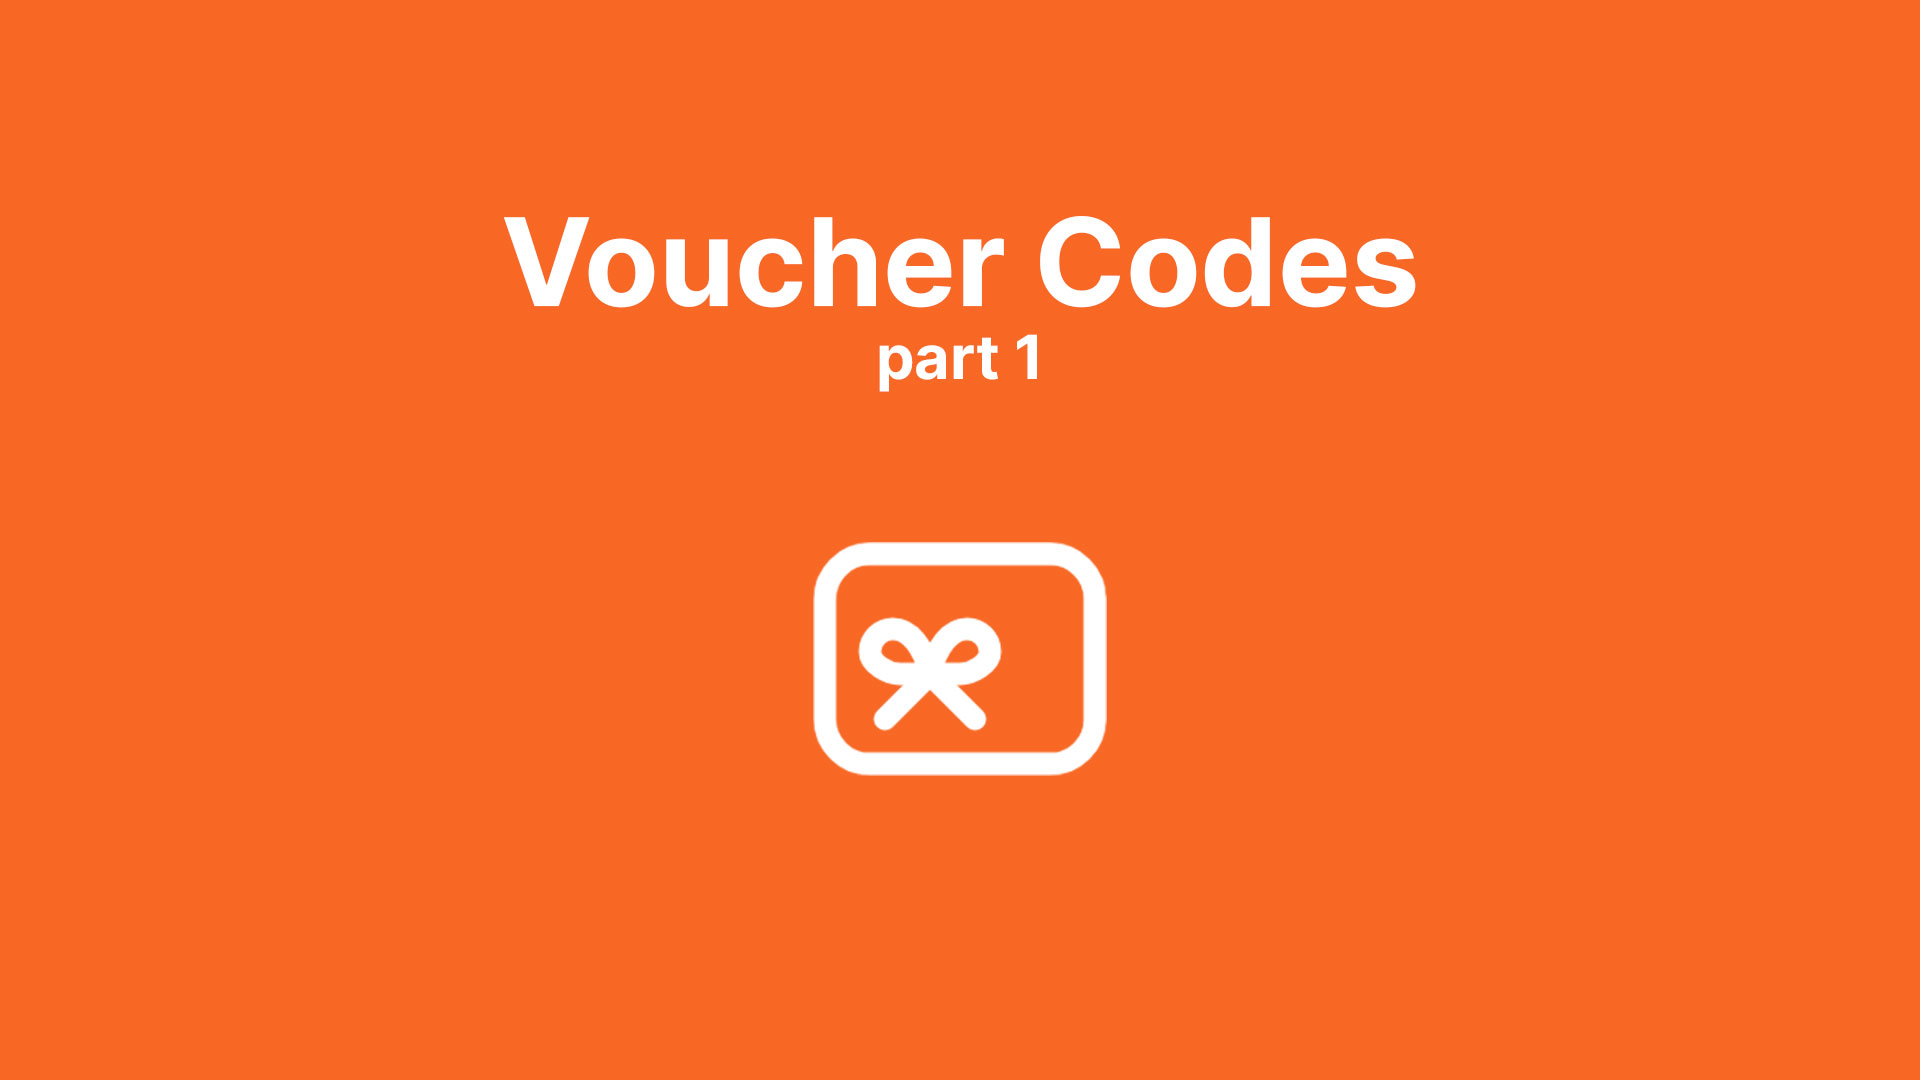 Using Voucher Codes in Customer Insights – The Set-Up